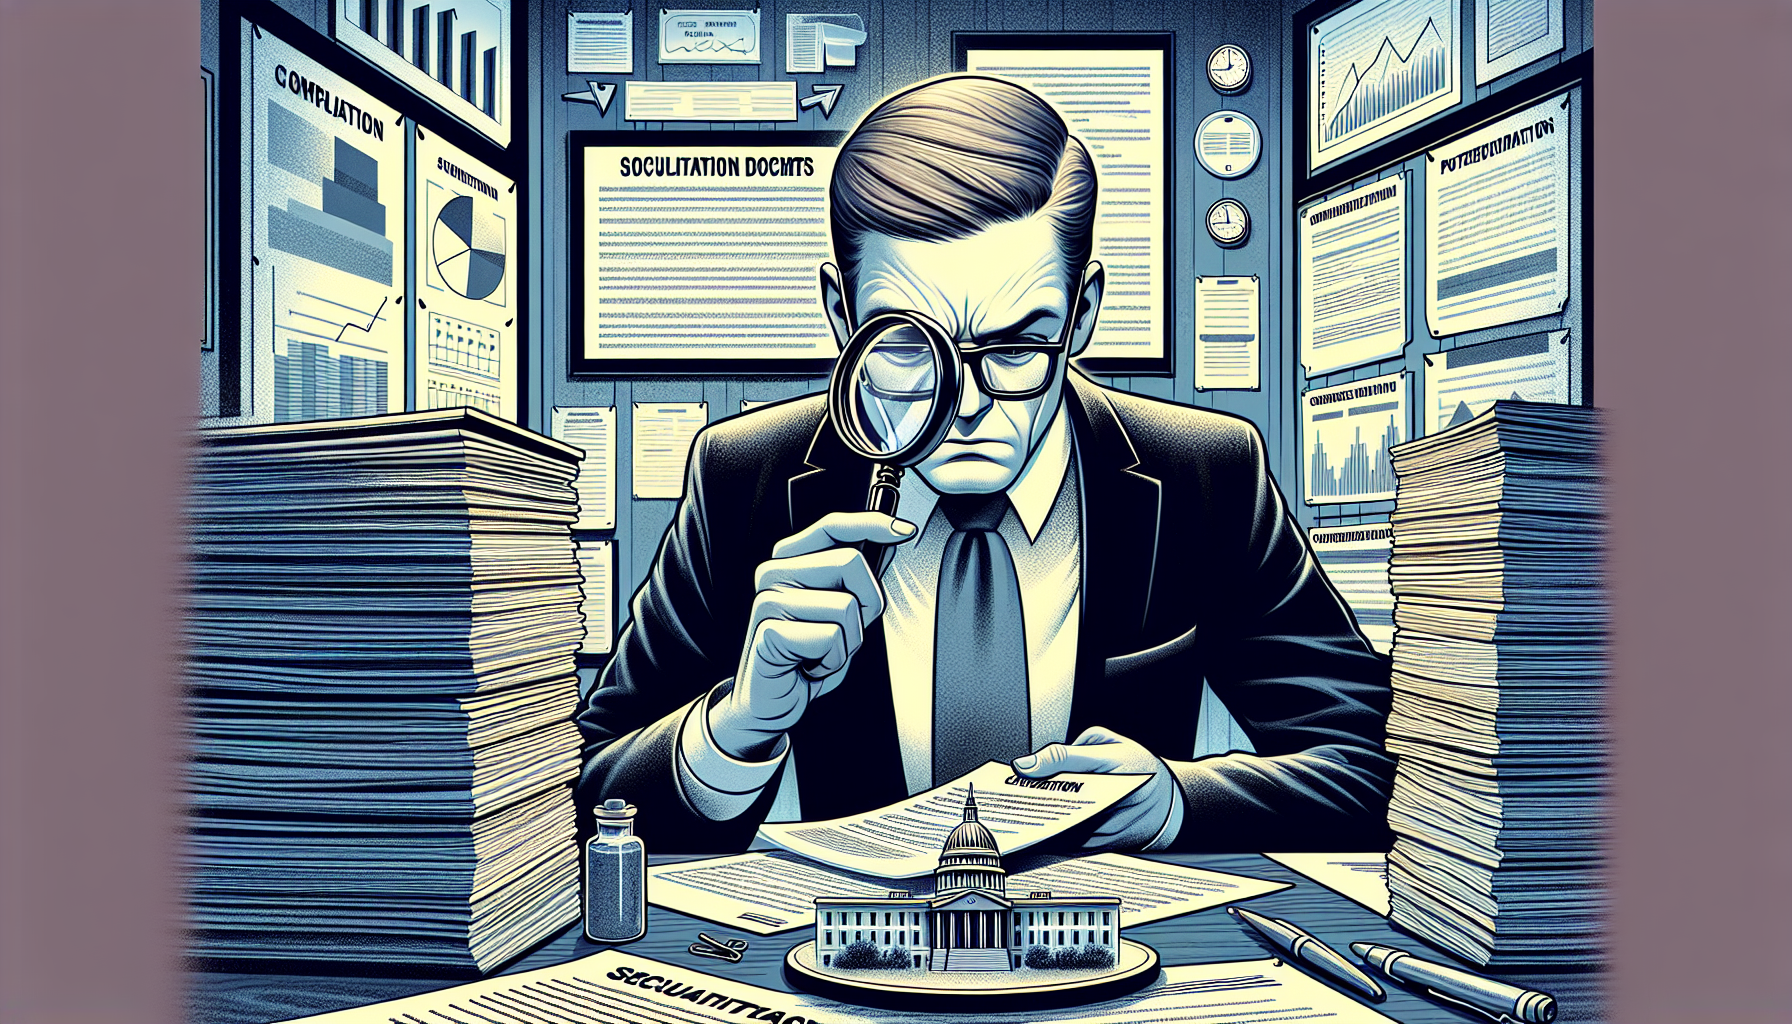 Illustration of a person analyzing solicitation documents and preparing a bid